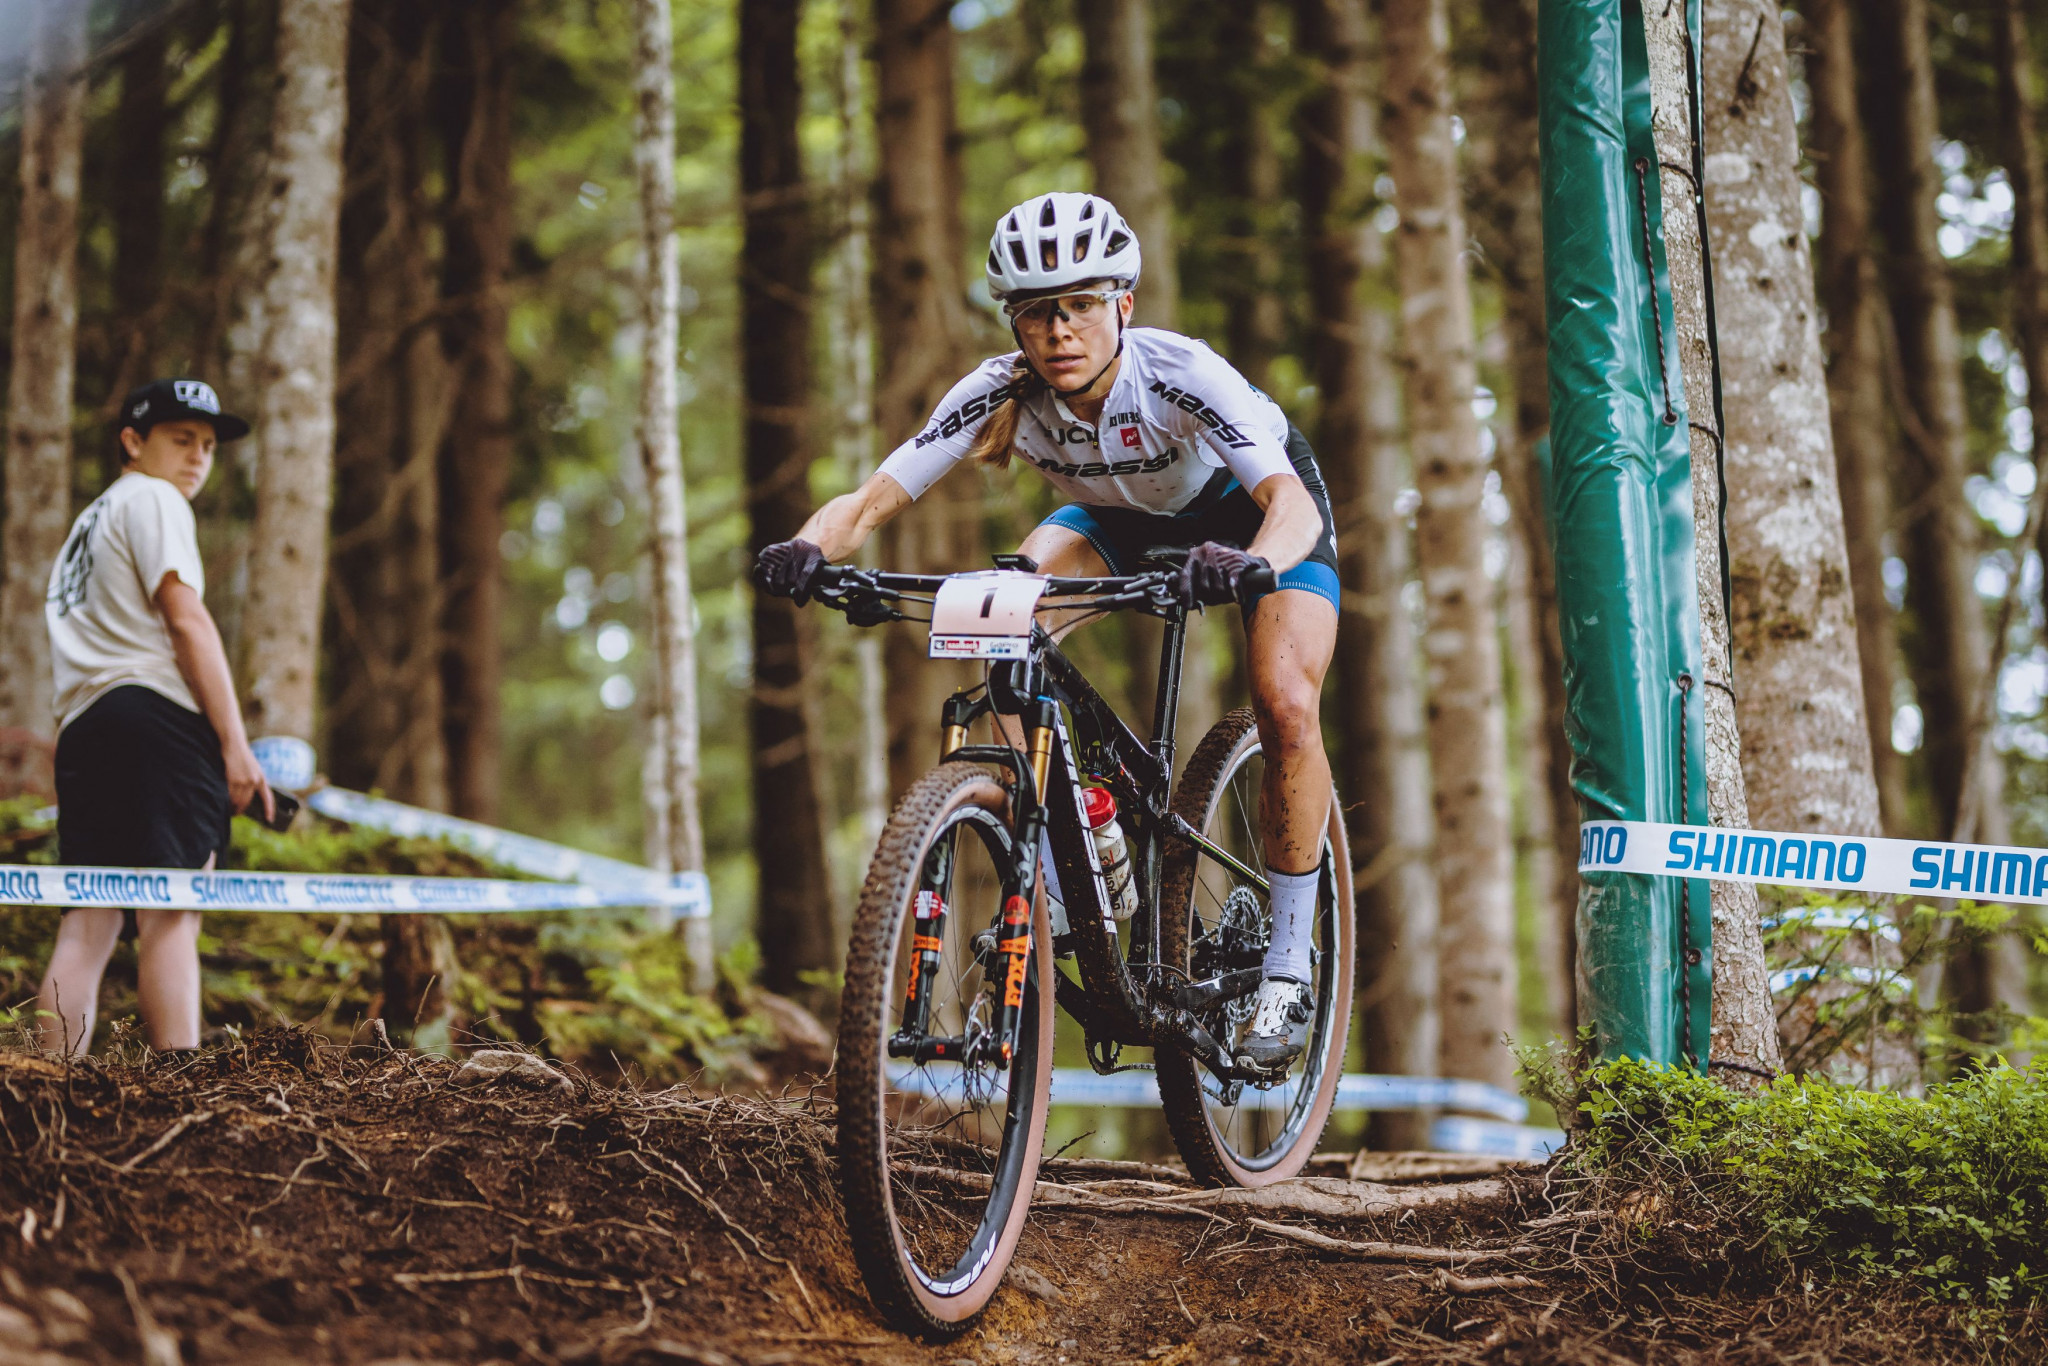 Loana Lecomte won her first short track UCI Mountain Bike World Cup event of the season ©Getty Images